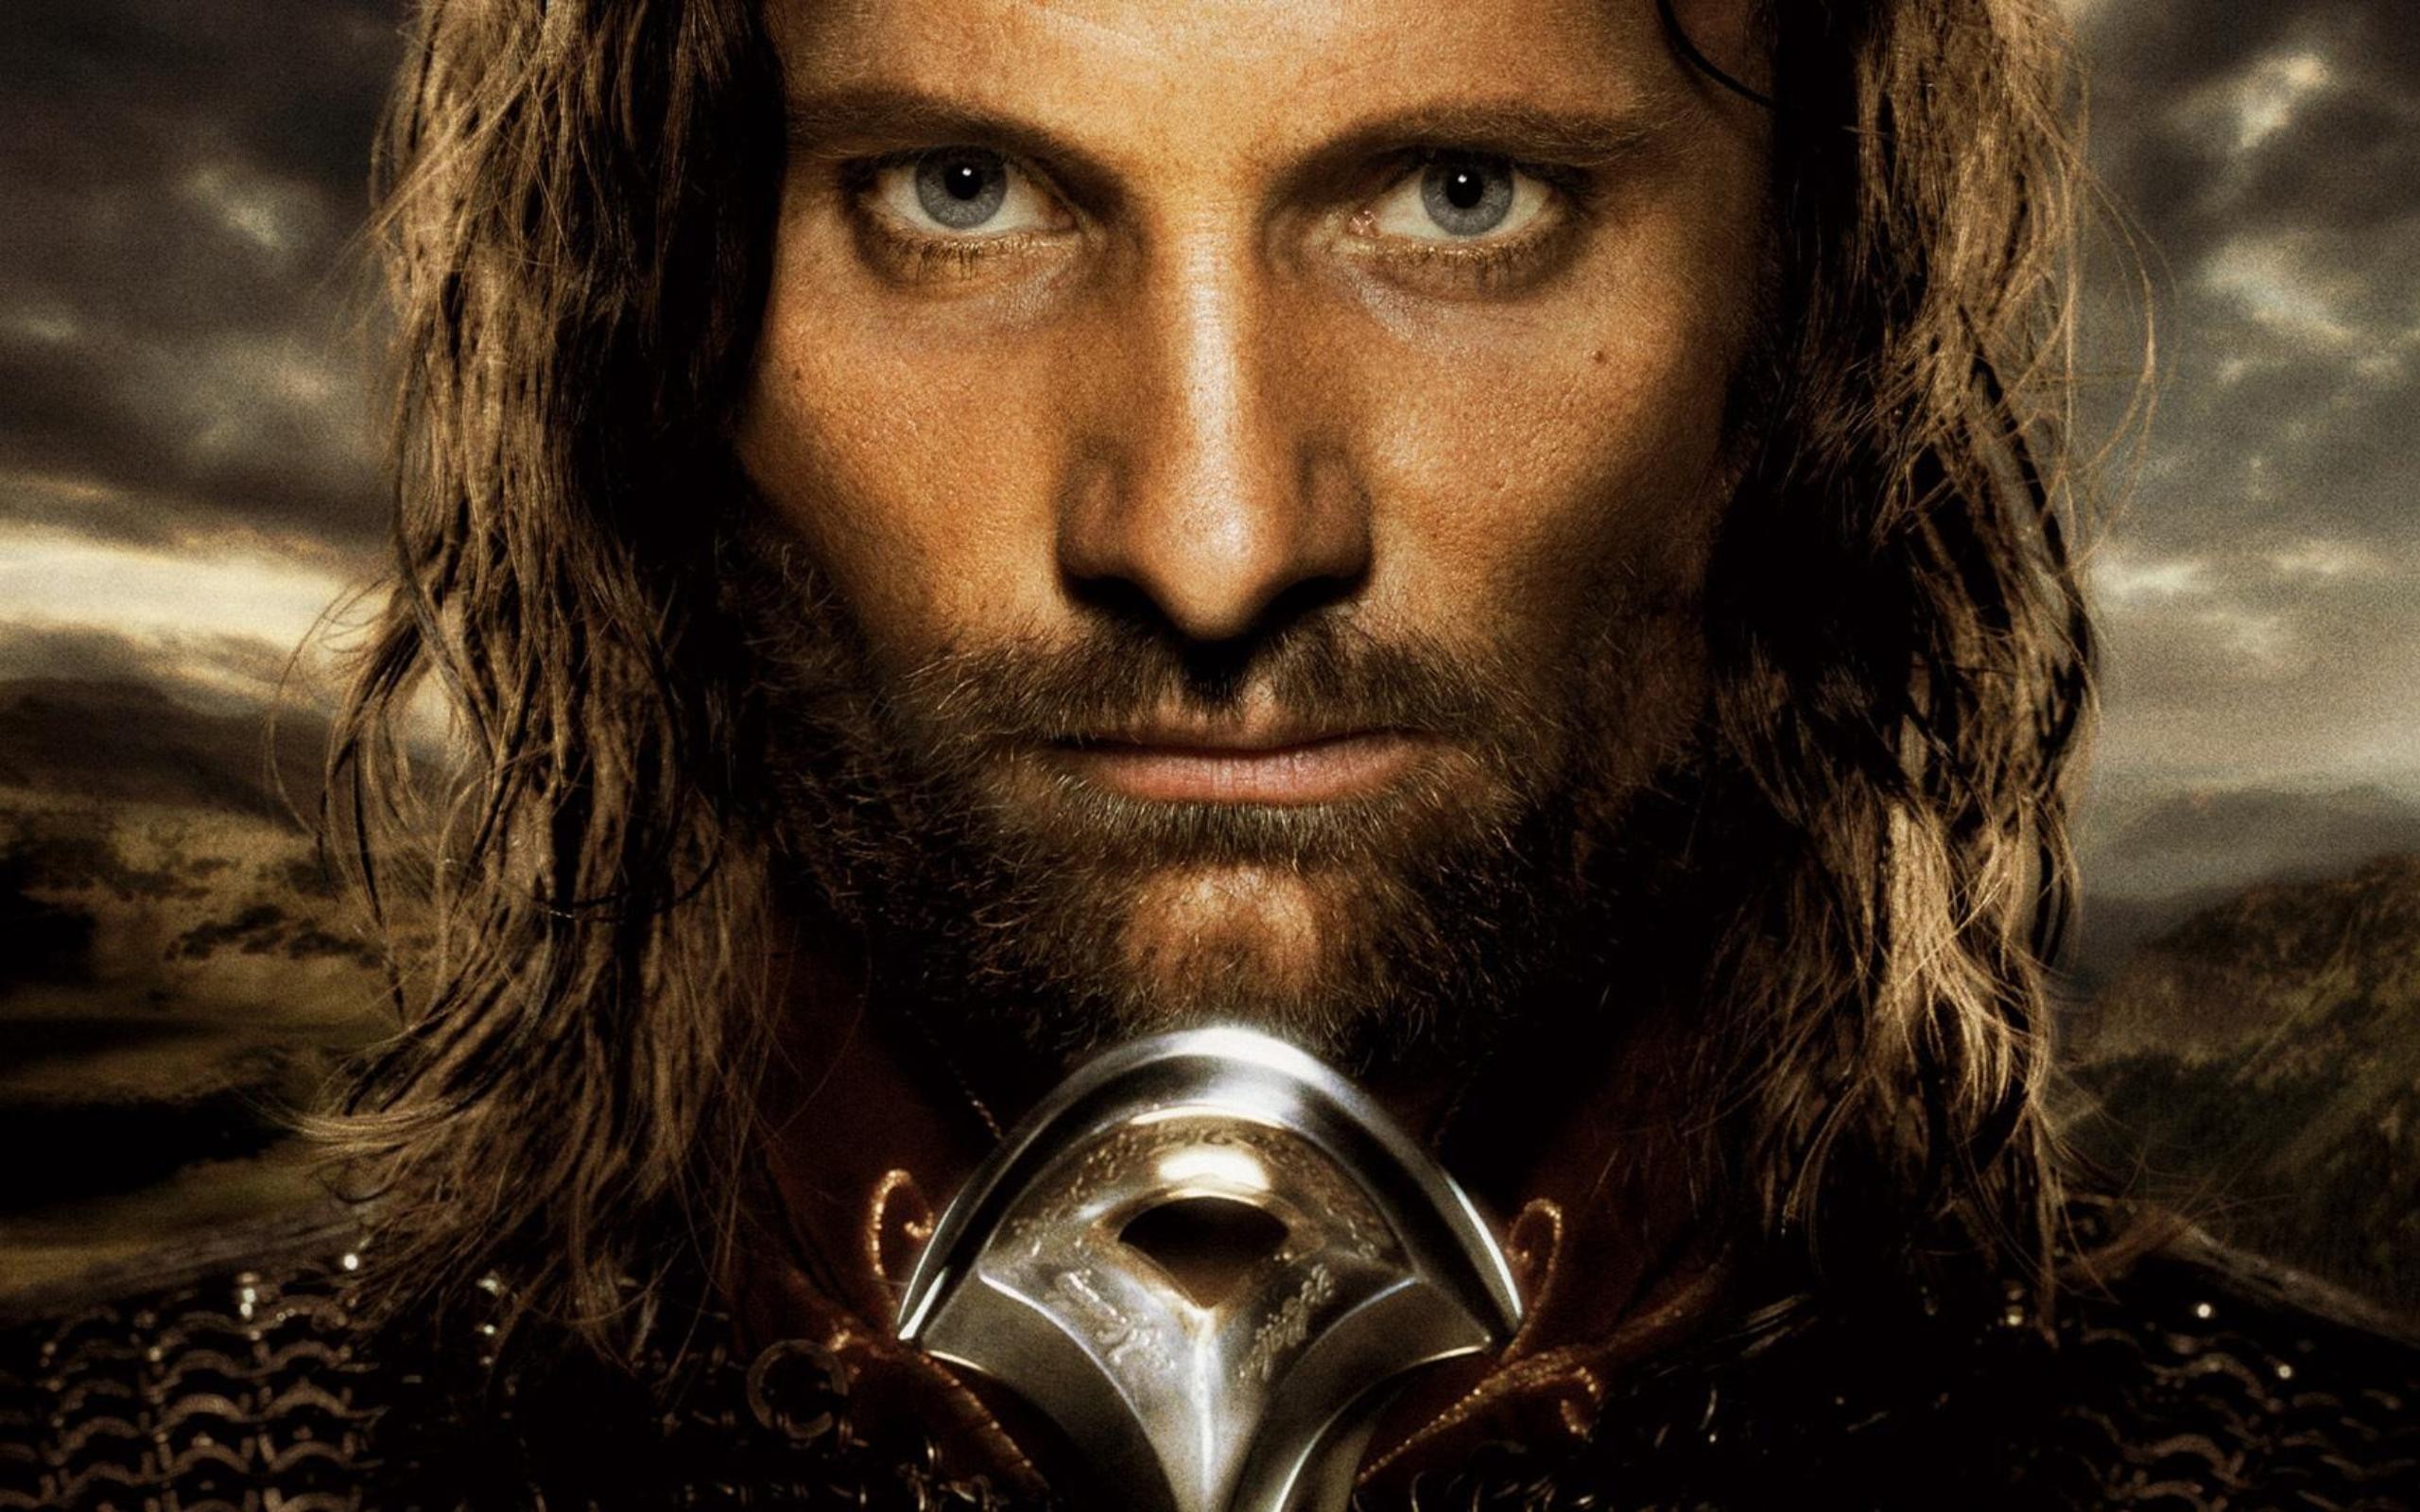 General 2560x1600 movies The Lord of the Rings Viggo Mortensen Aragorn The Lord of the Rings: The Return of the King fantasy men looking at viewer beard actor men Book characters J. R. R. Tolkien